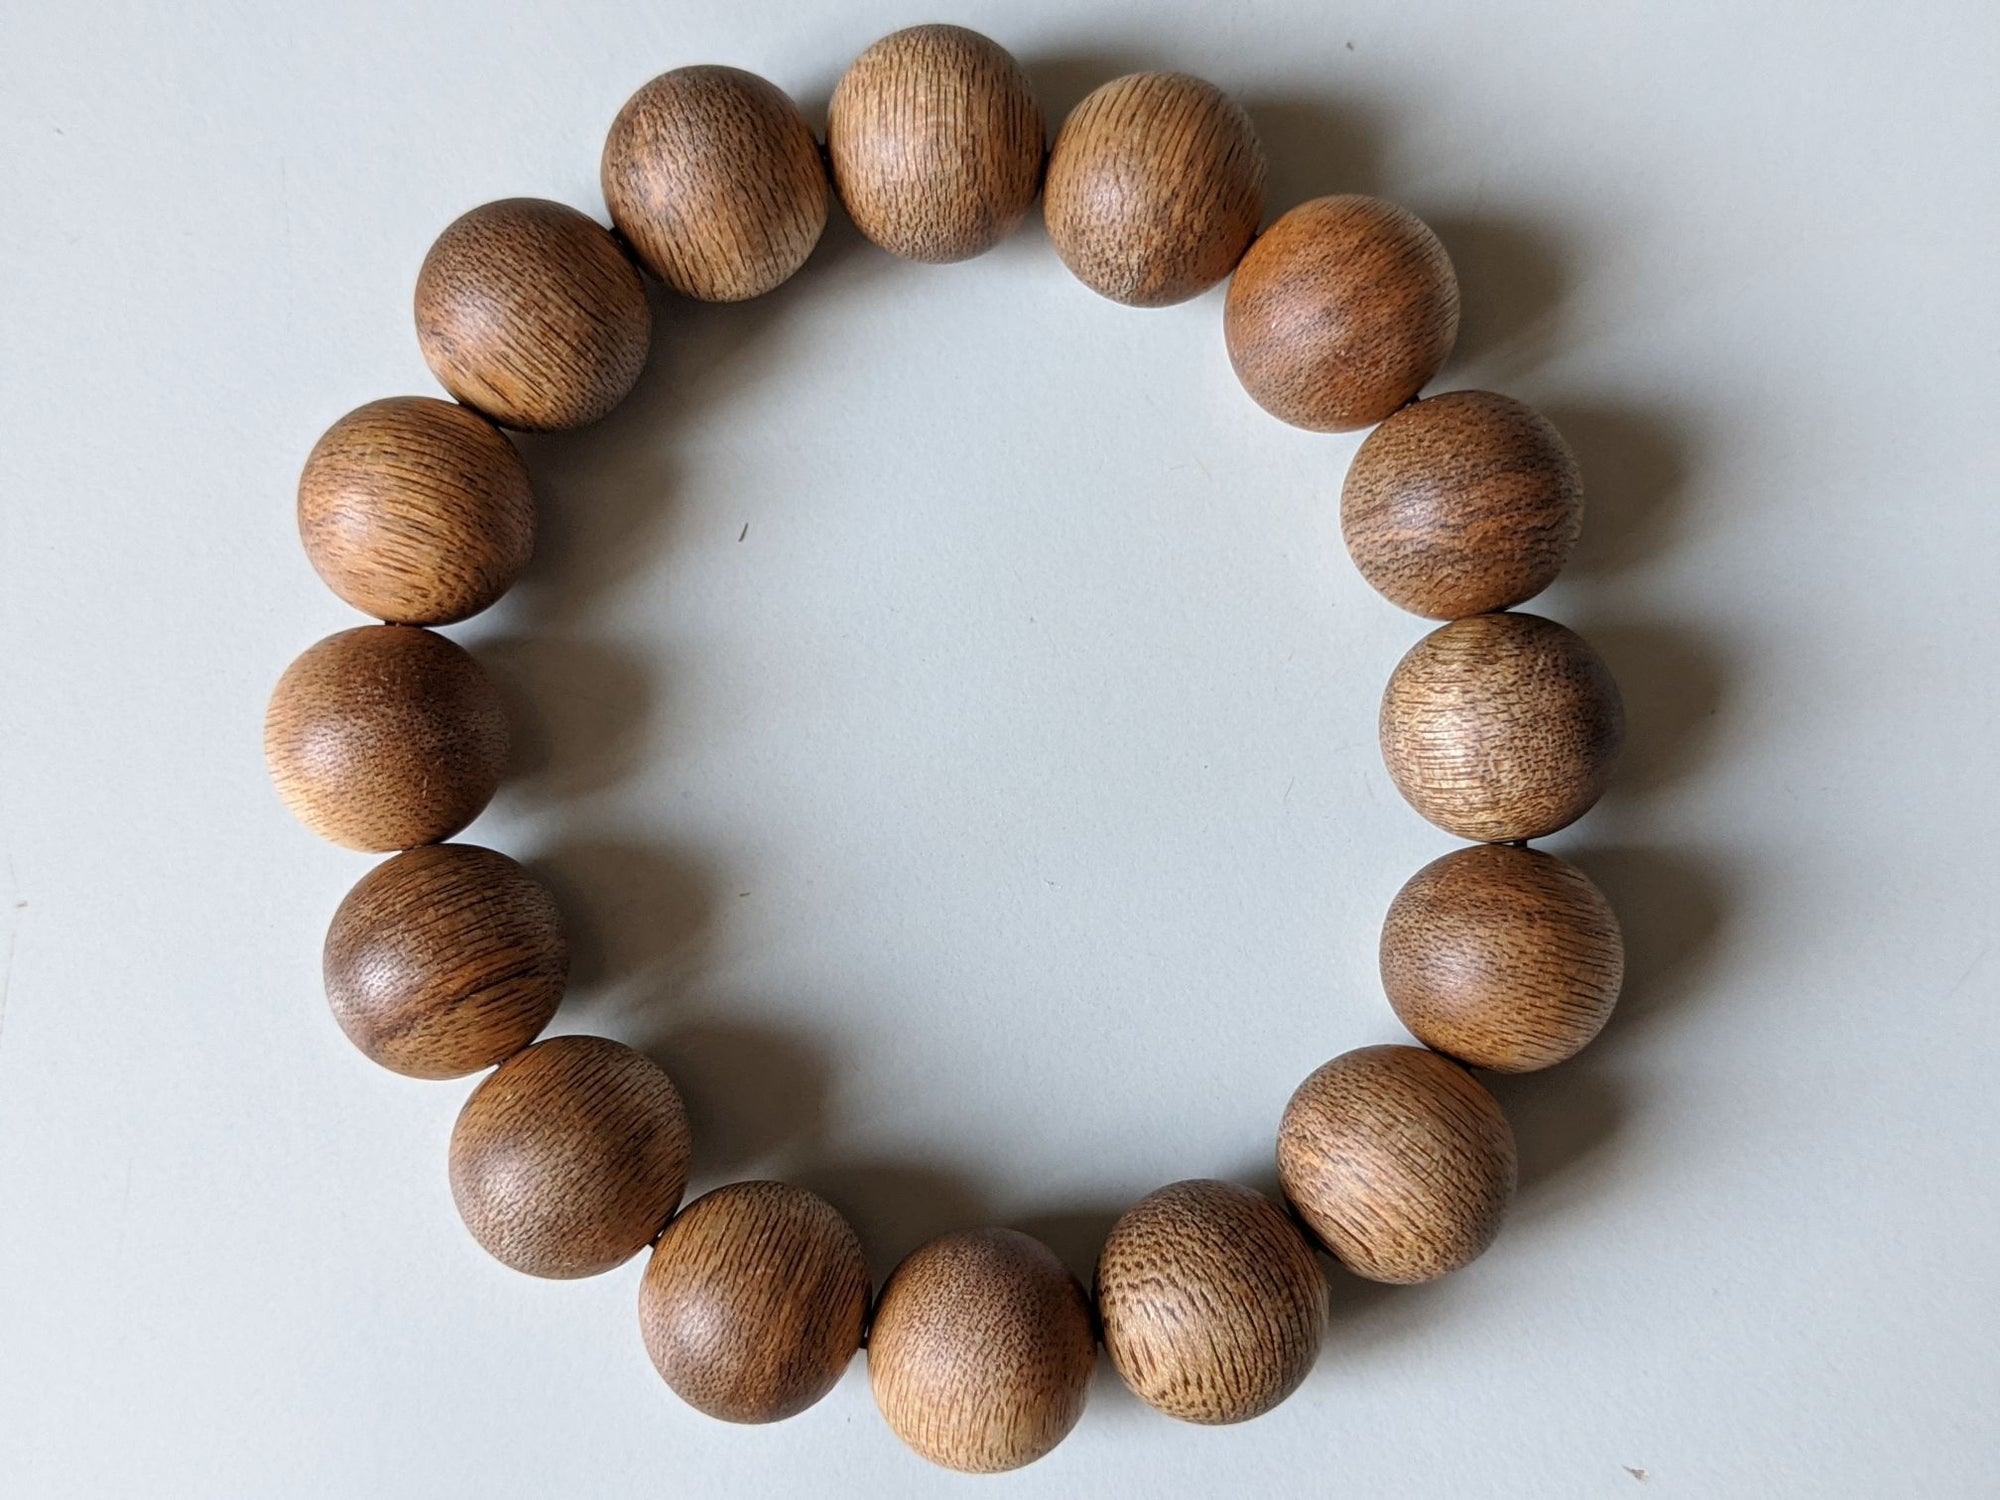 The GGG, Premium Cultivated Agarwood 108 Mala and/or Bracelet - Cultivated beads with wild agarwood quality - 14mm Agarwood Bracelet 16 beads 11g